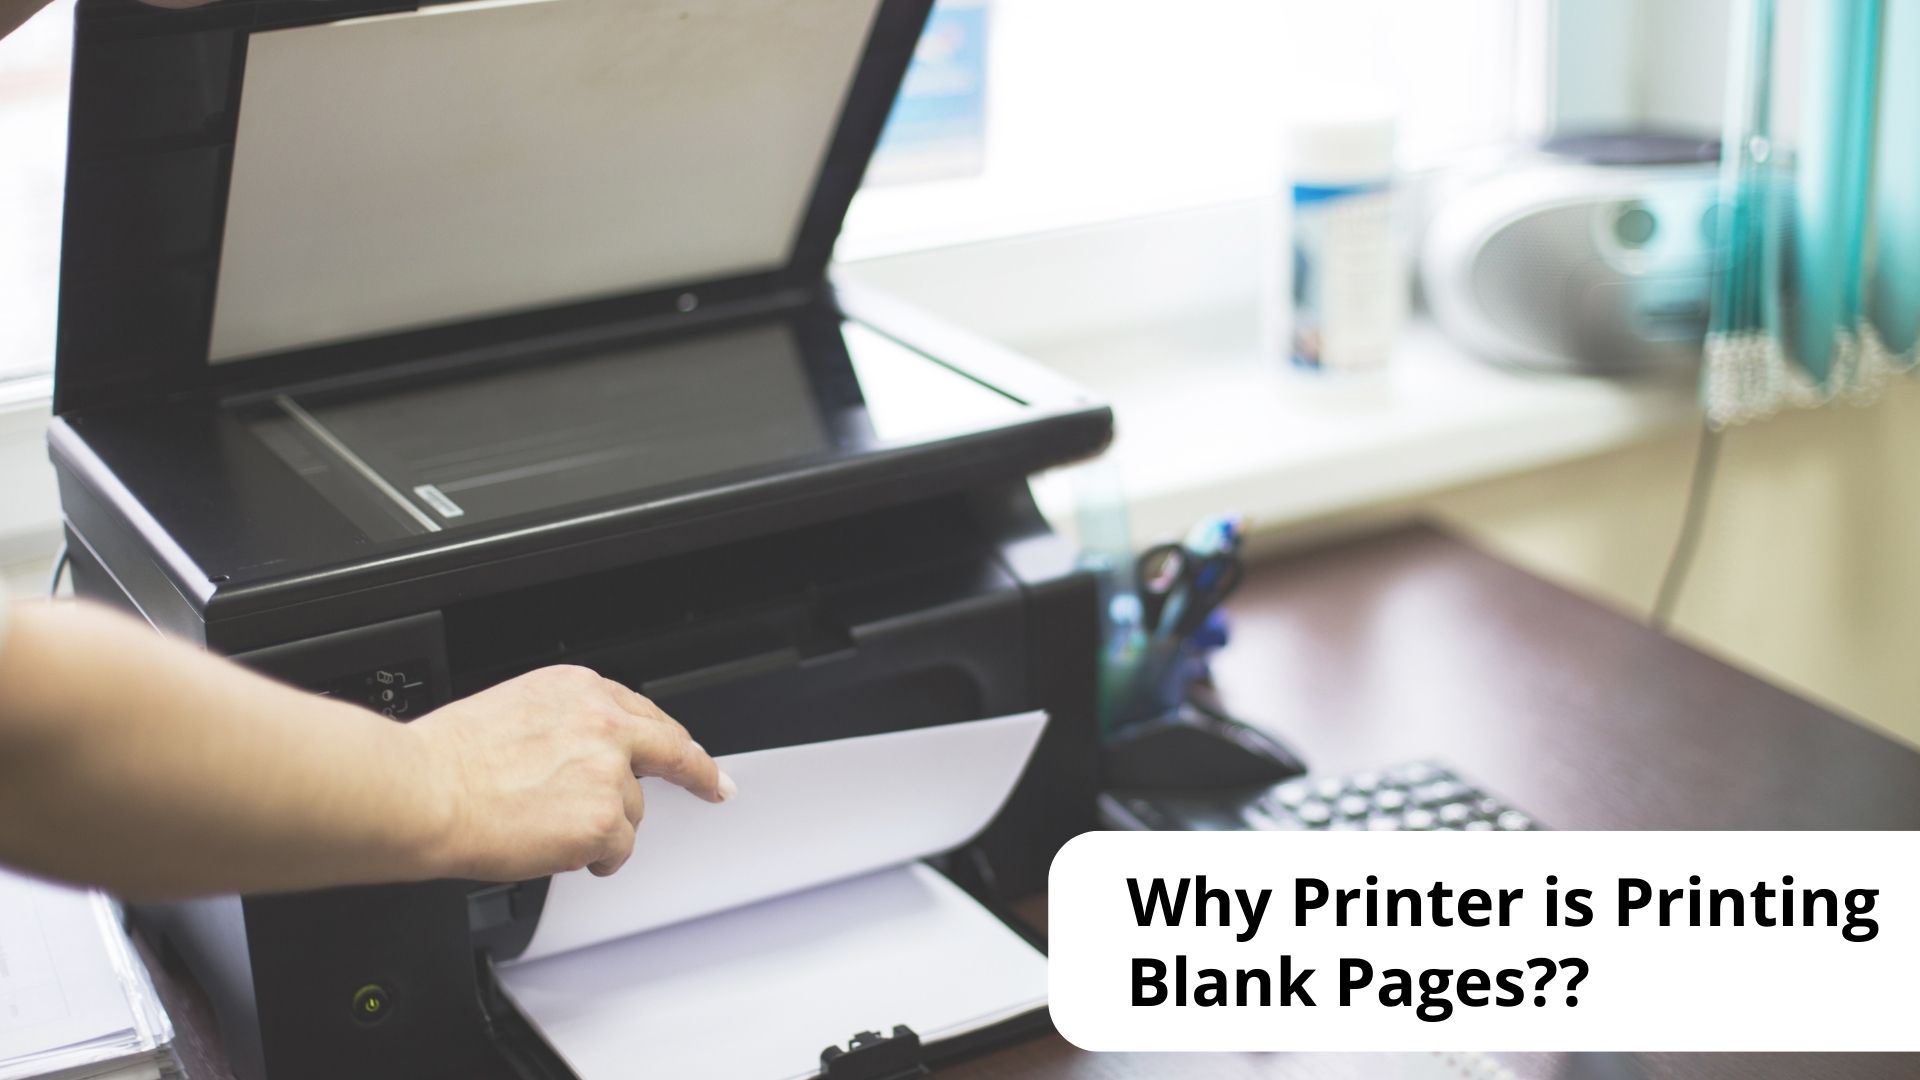 Why Printer is Printing Blank Pages